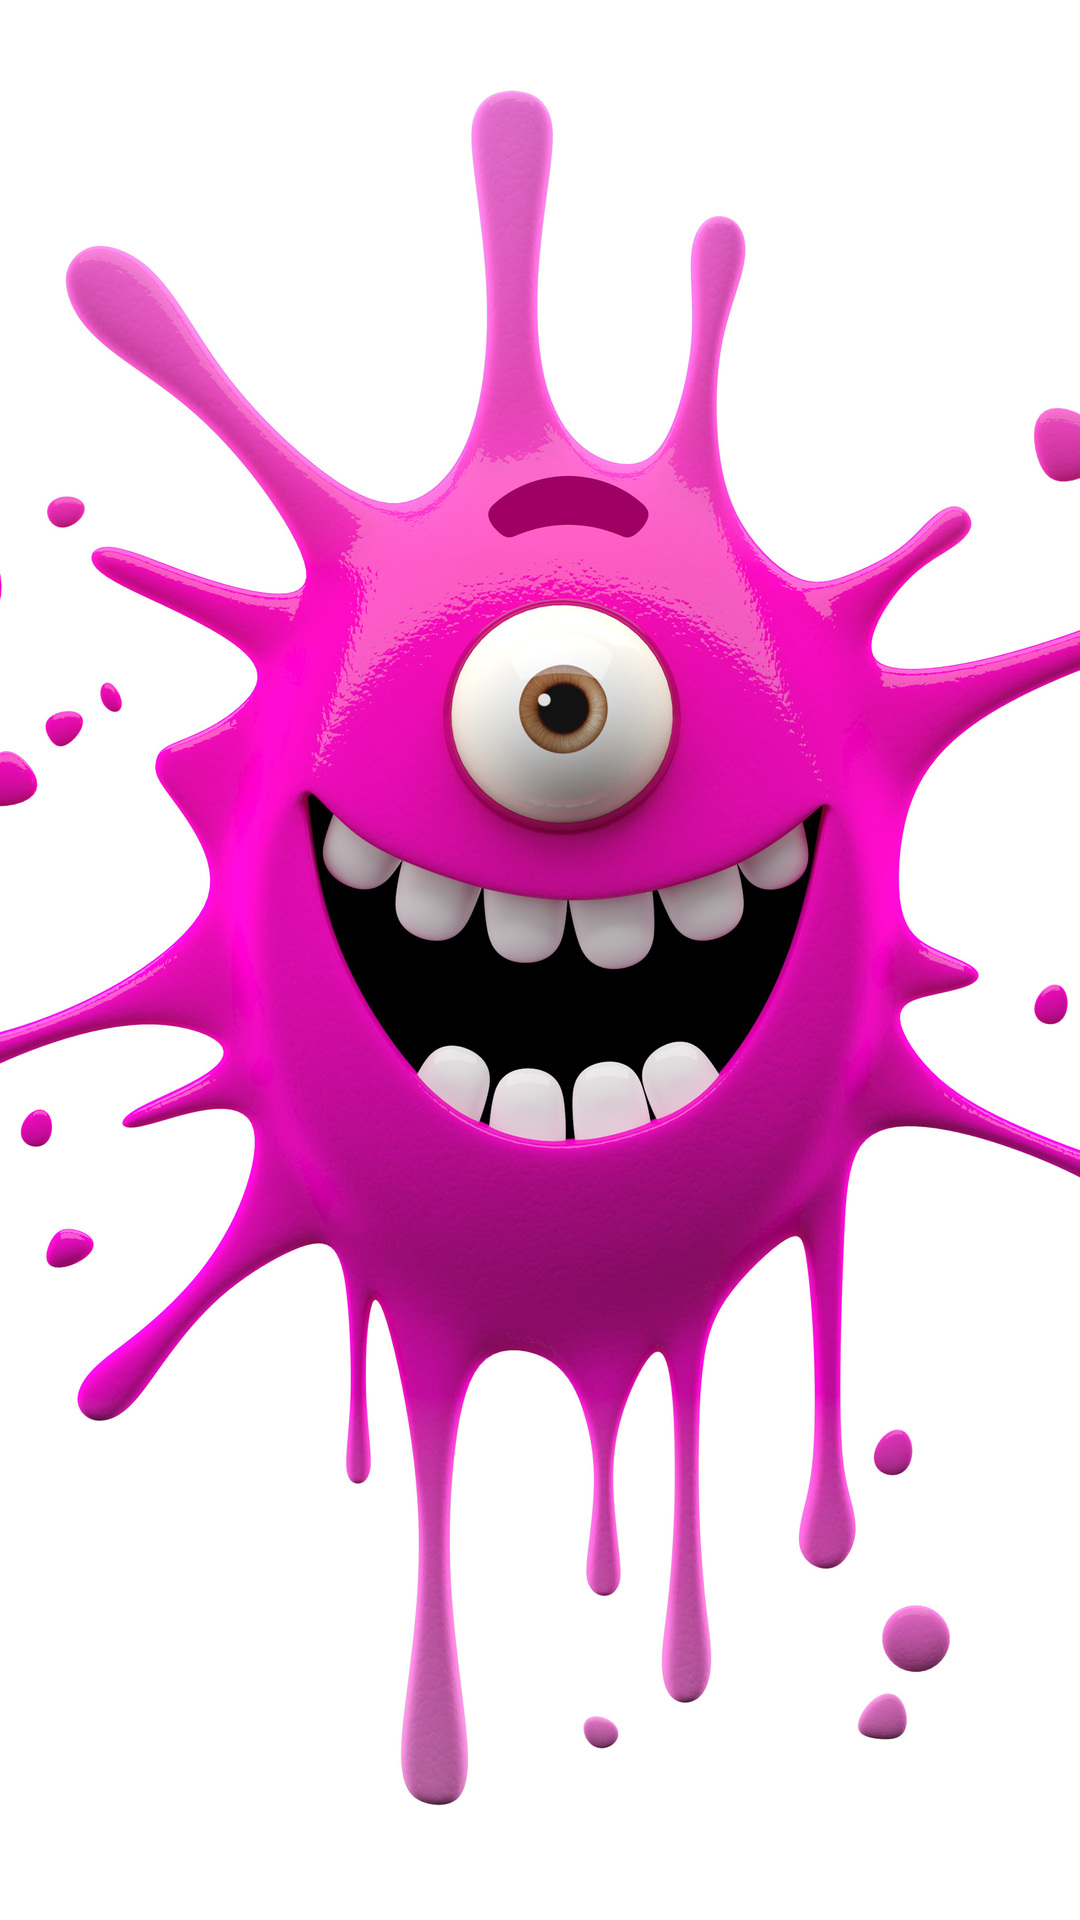 3d, Smile, Funny, Character, Cute, Monster Photo - Cute Character Monster 3d - HD Wallpaper 